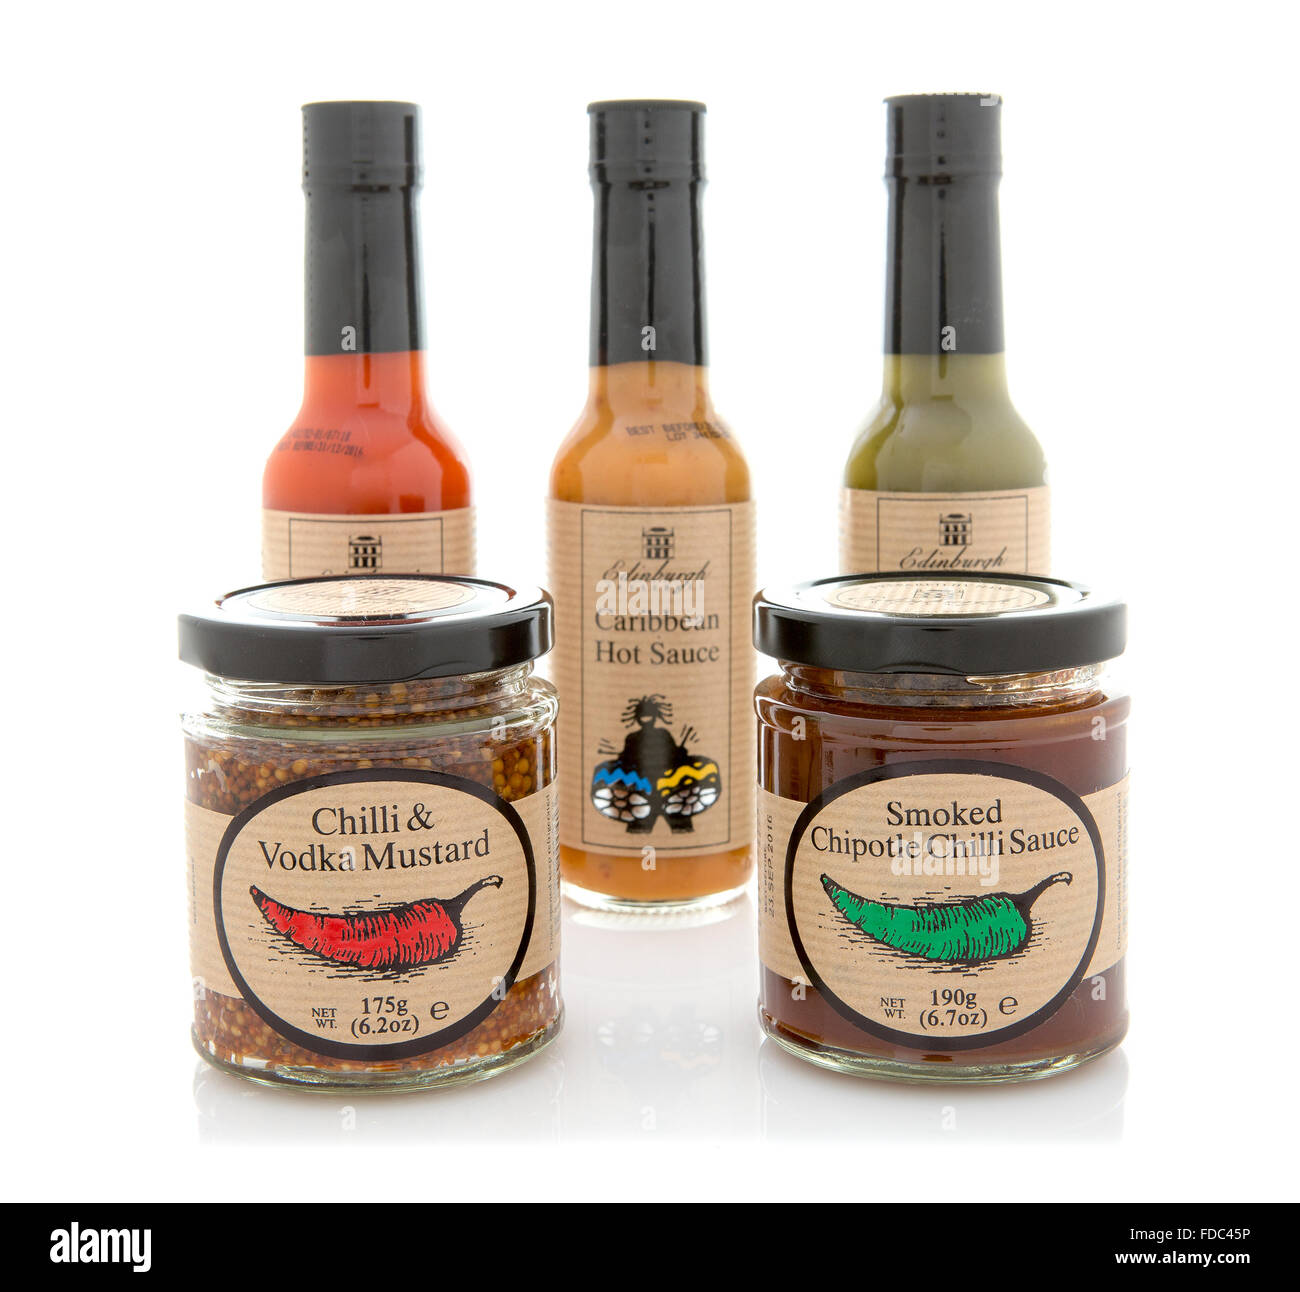 Collection of Sauces with Chilli and Vodka Mustard, Smoked Chipotle Chill on a White Background Stock Photo